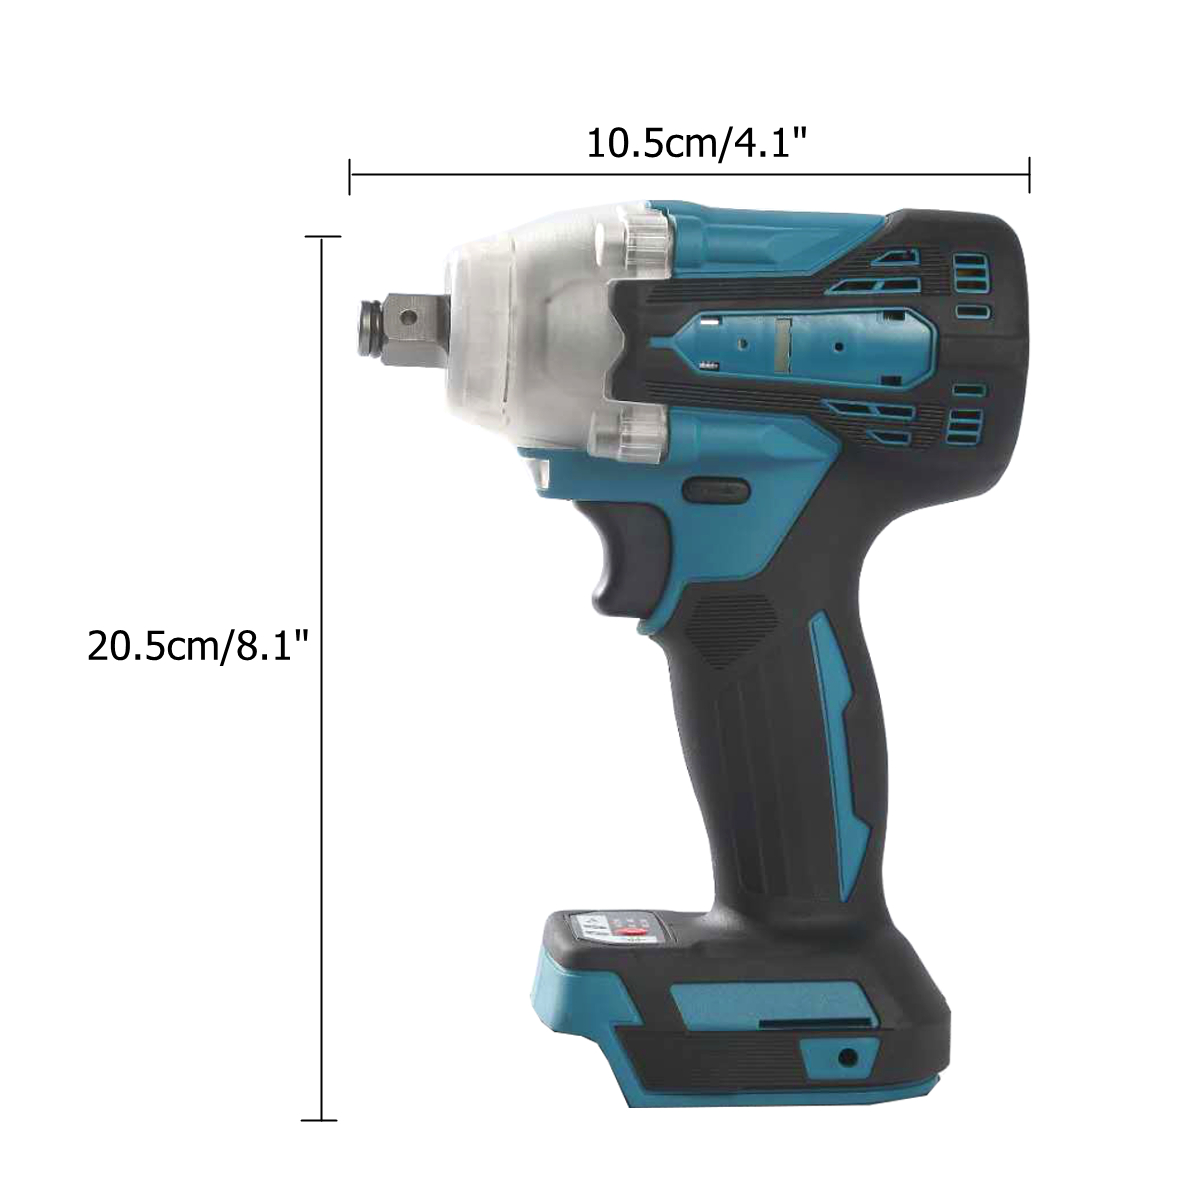 800Nm-Brushless-Cordless-12-Impact-Wrench-Driver-Replacement-for-Makita-18V-Battery-1765713-11